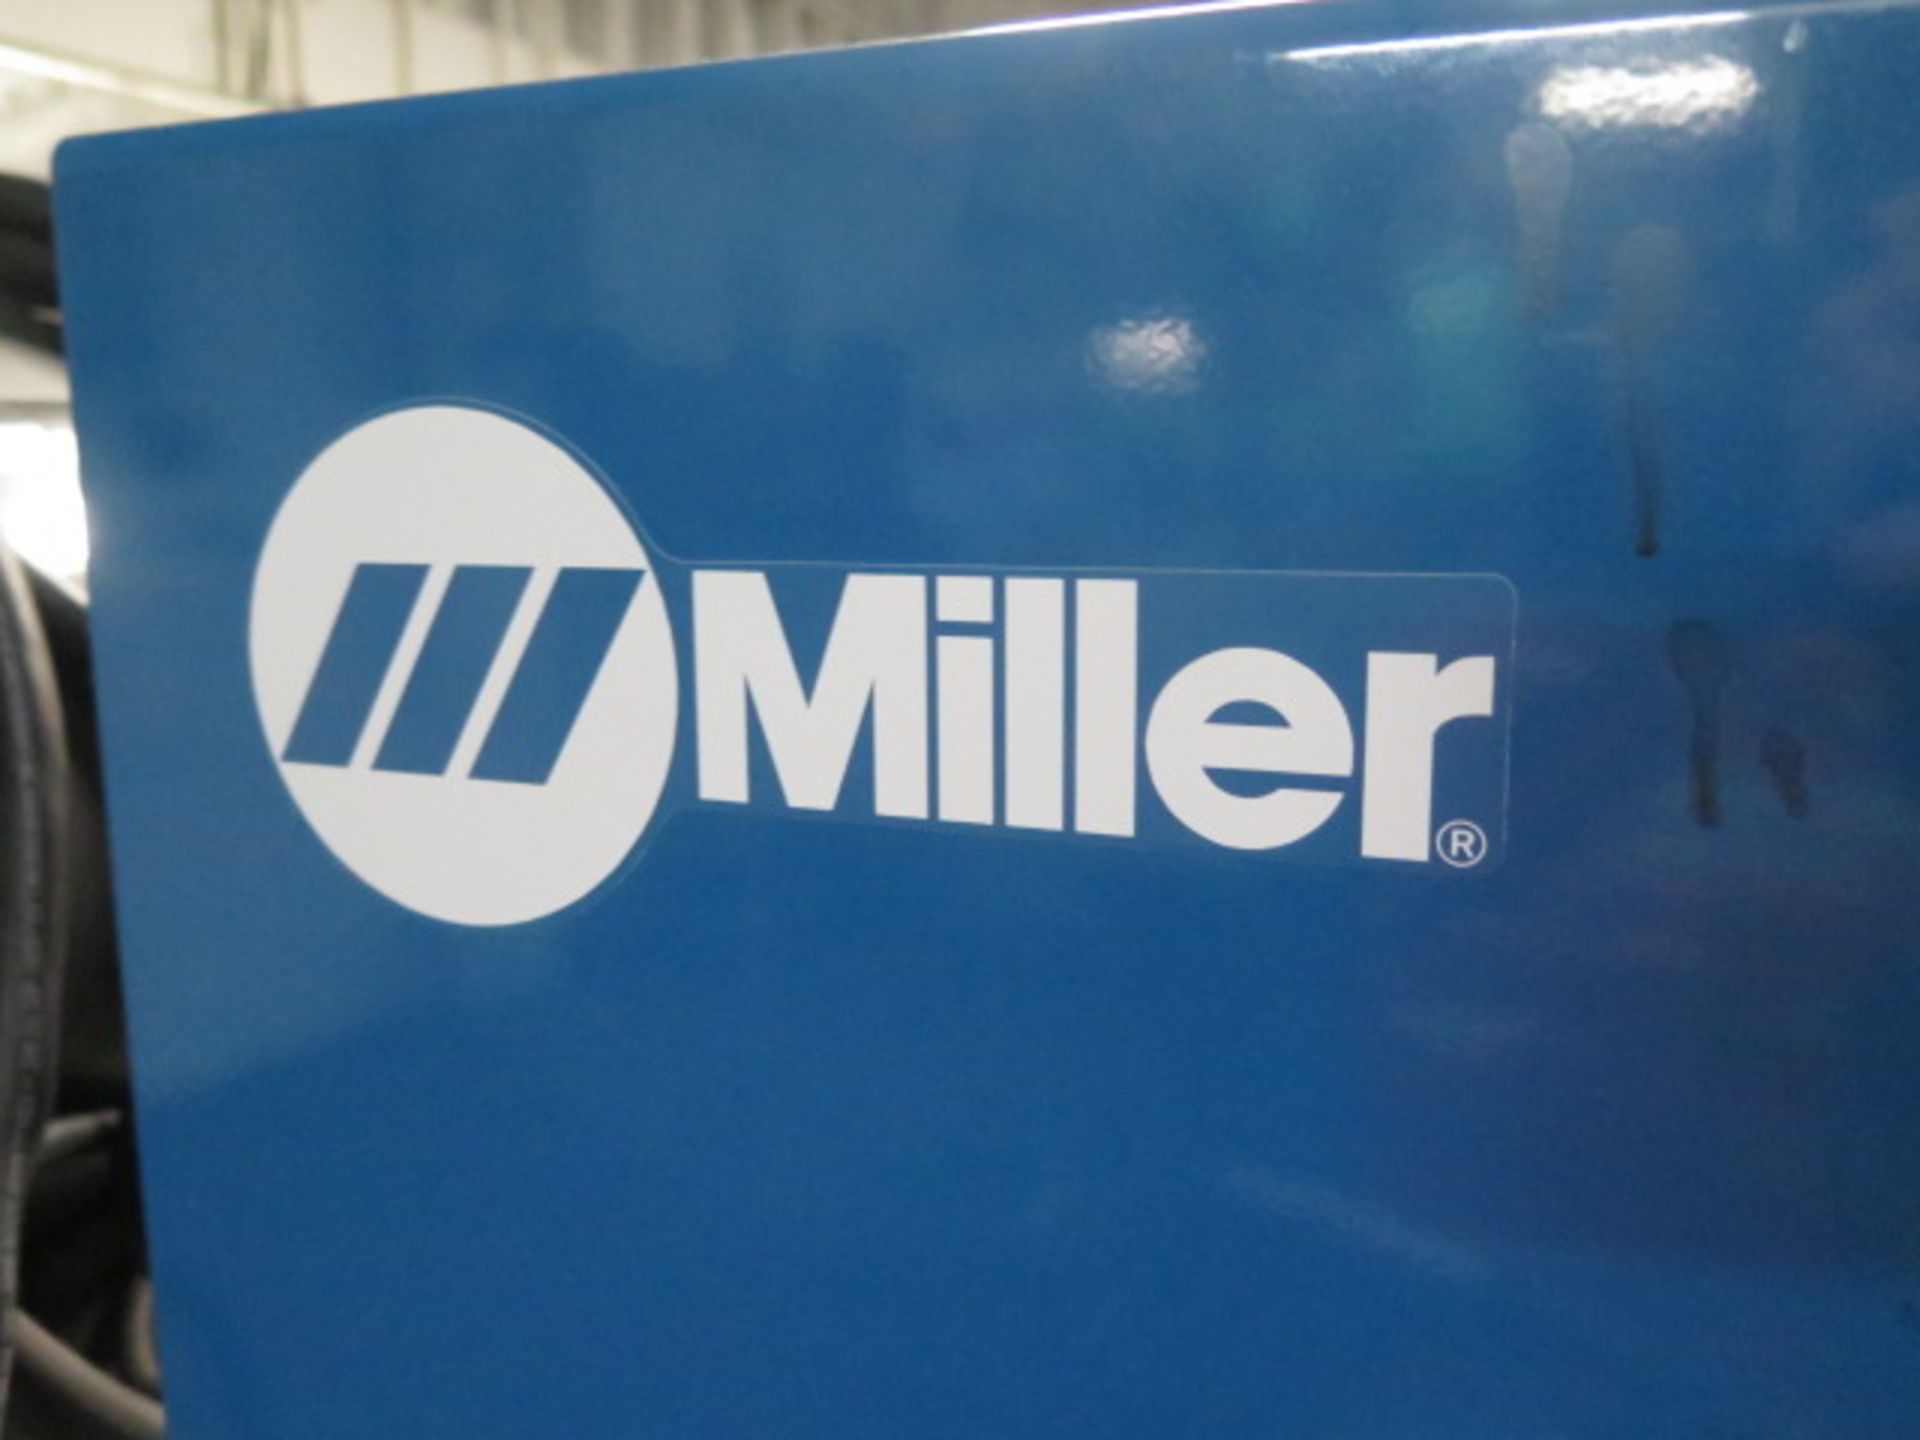 Miller Dimension 650 Arc Welding Power Source s/n MK450523C w/ Miller XR-Alumina Feed, SOLD AS IS - Image 3 of 17